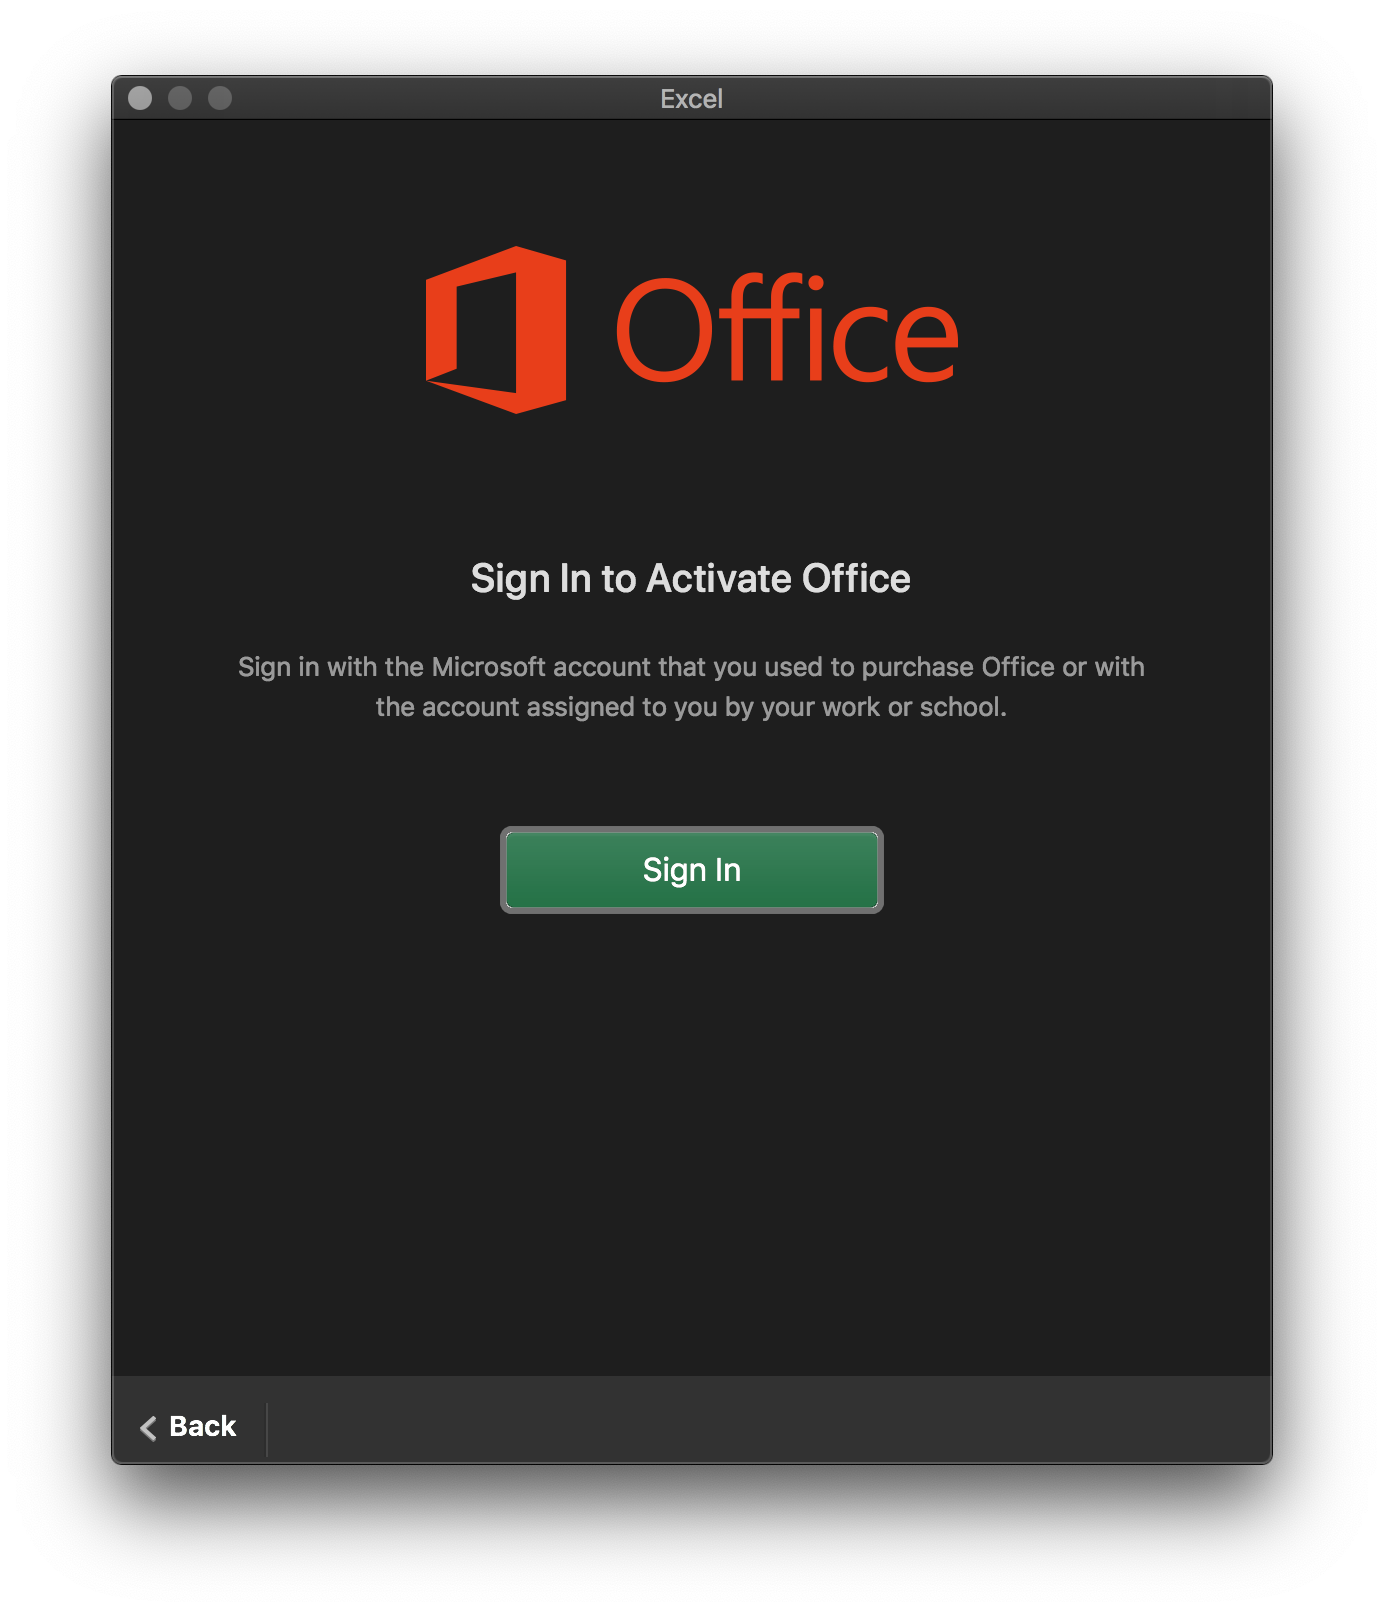 office 2016 for mac the installation failed